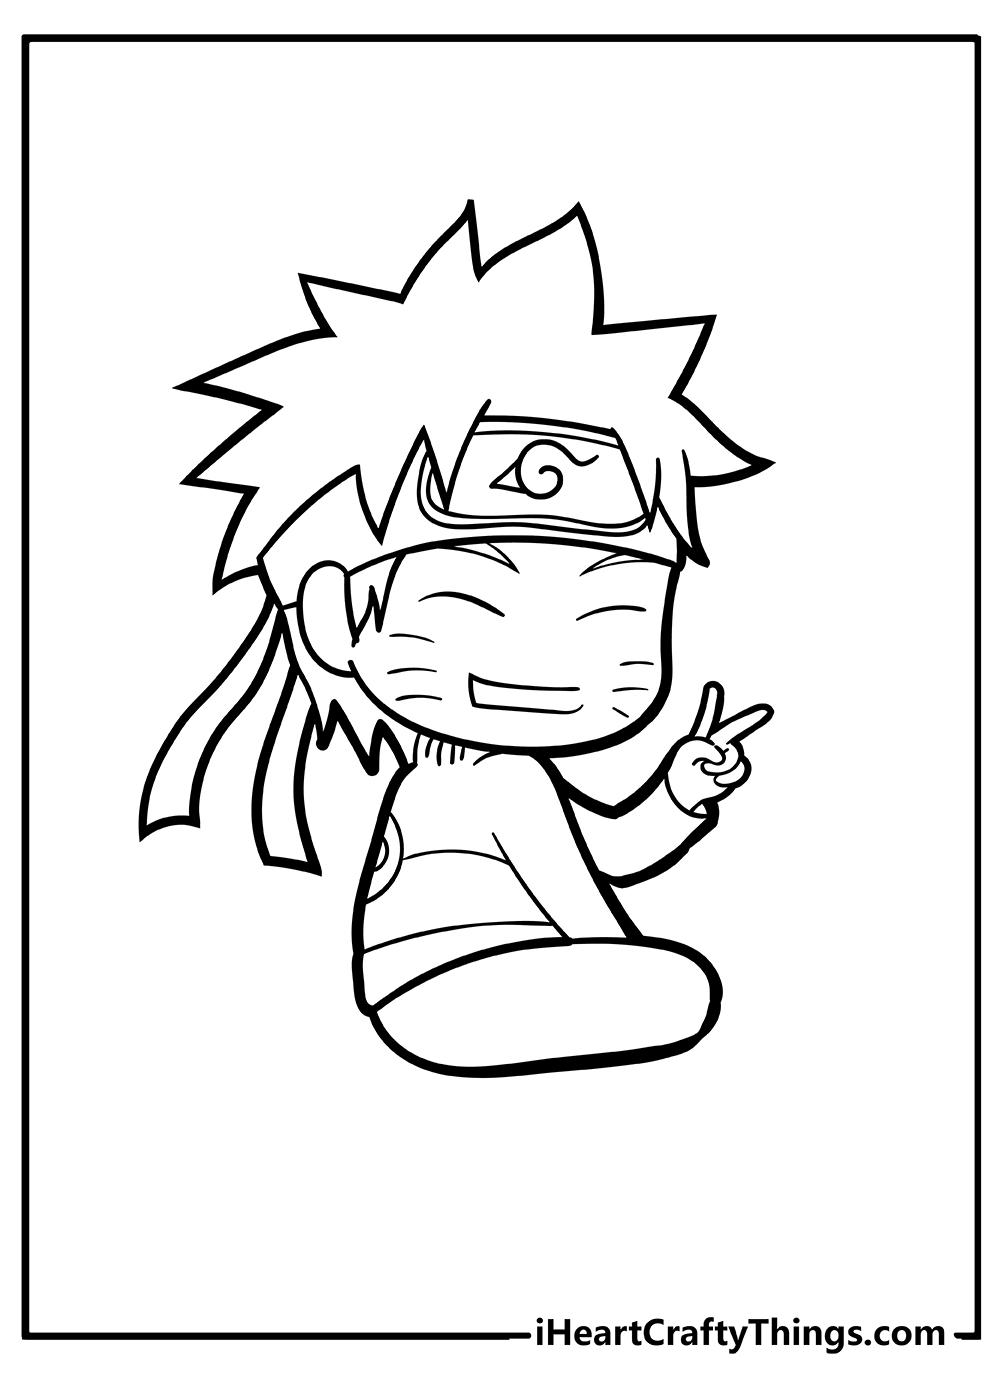 Printable Chibi Coloring Pages Updated 20